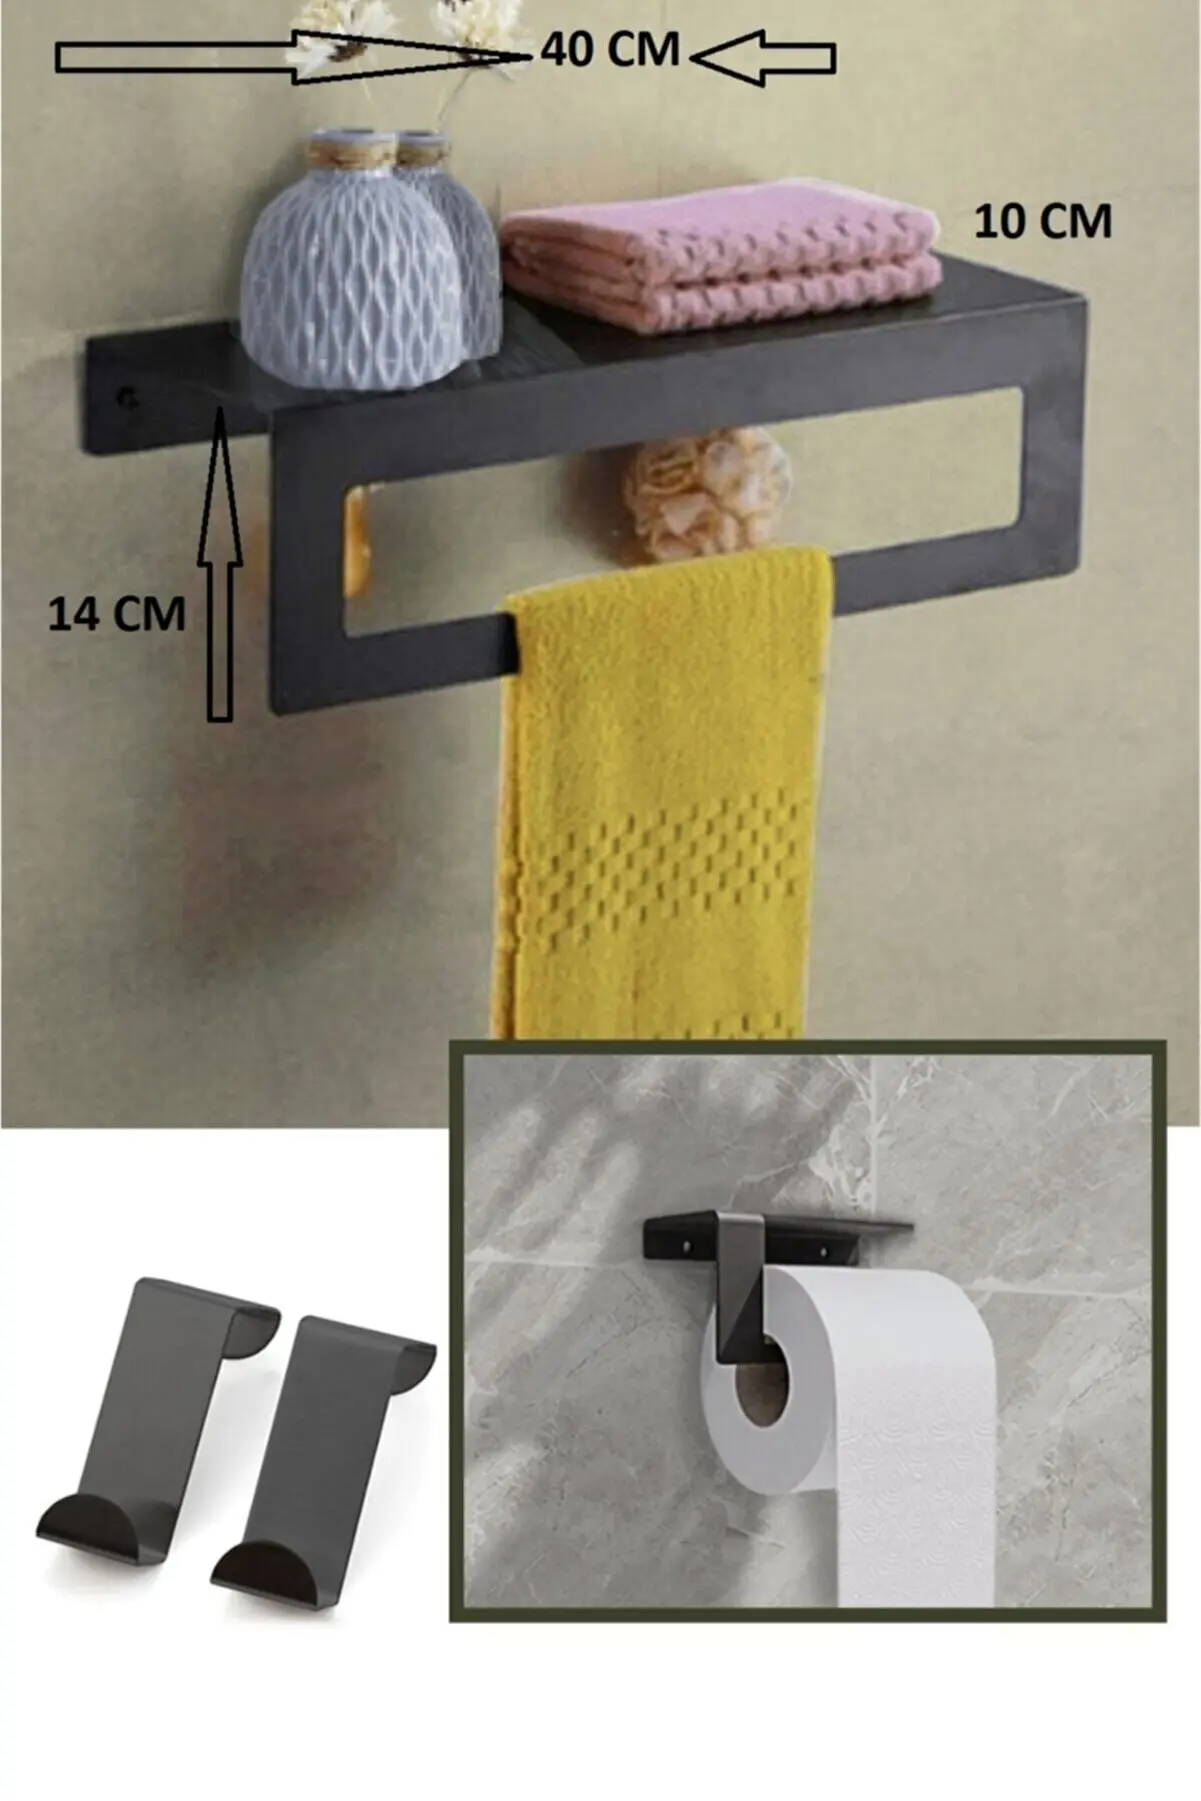 Metal Towel Holder With Hanger Back And Toilet Paper Holder Set Set of 2+ pieces of hooks behind the door bathroom accessories t